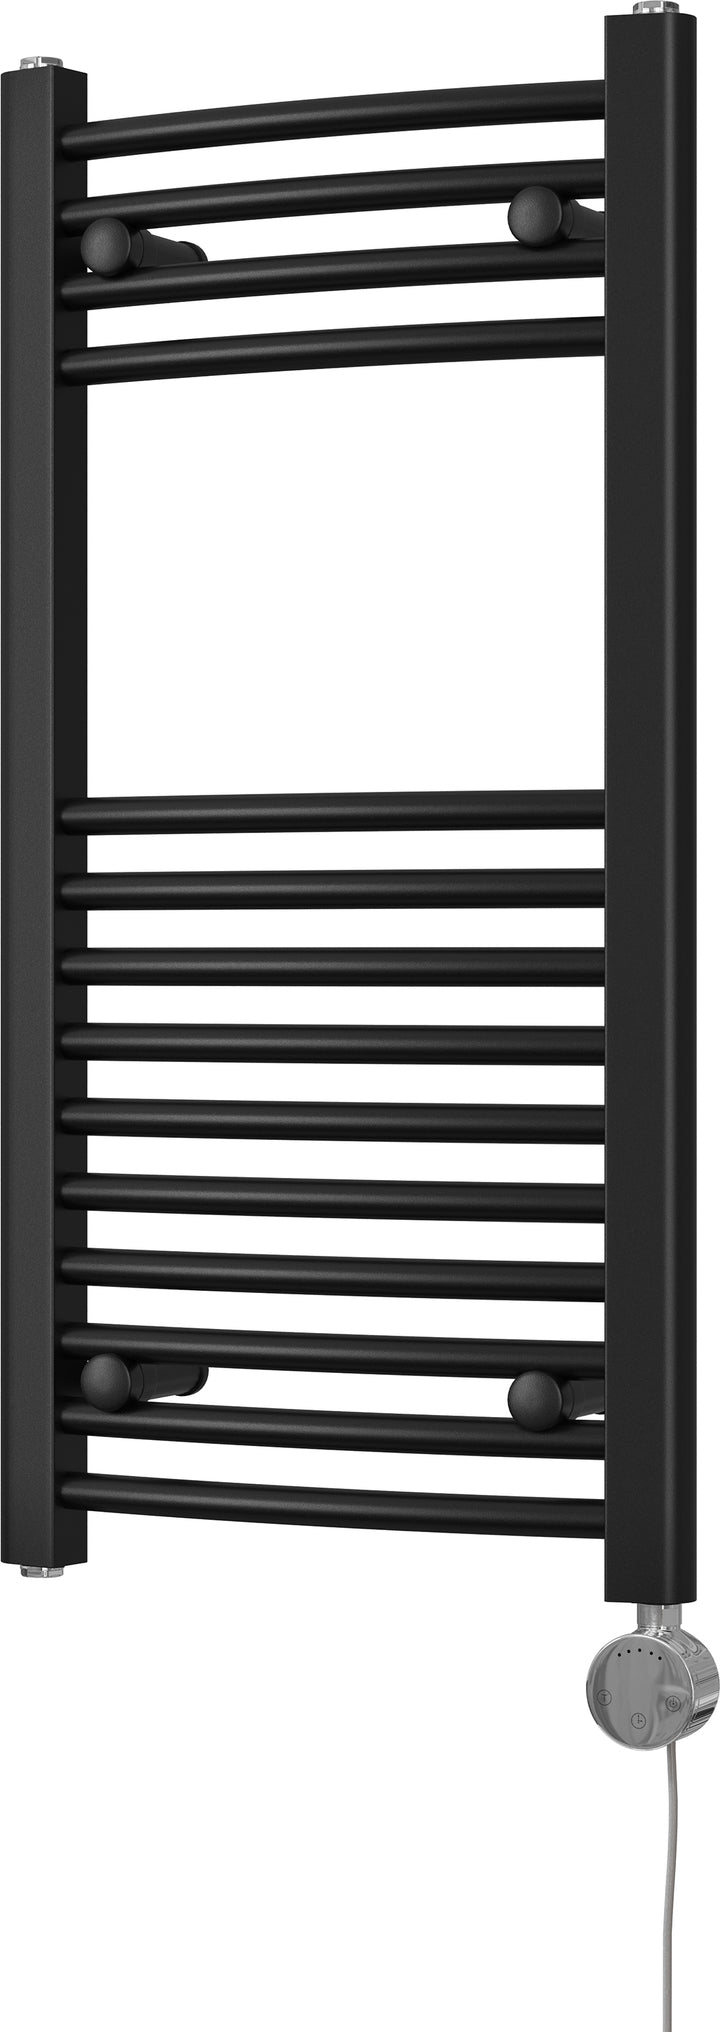 Zennor - Black Electric Towel Rail H800mm x W400mm Curved 300w Thermostatic